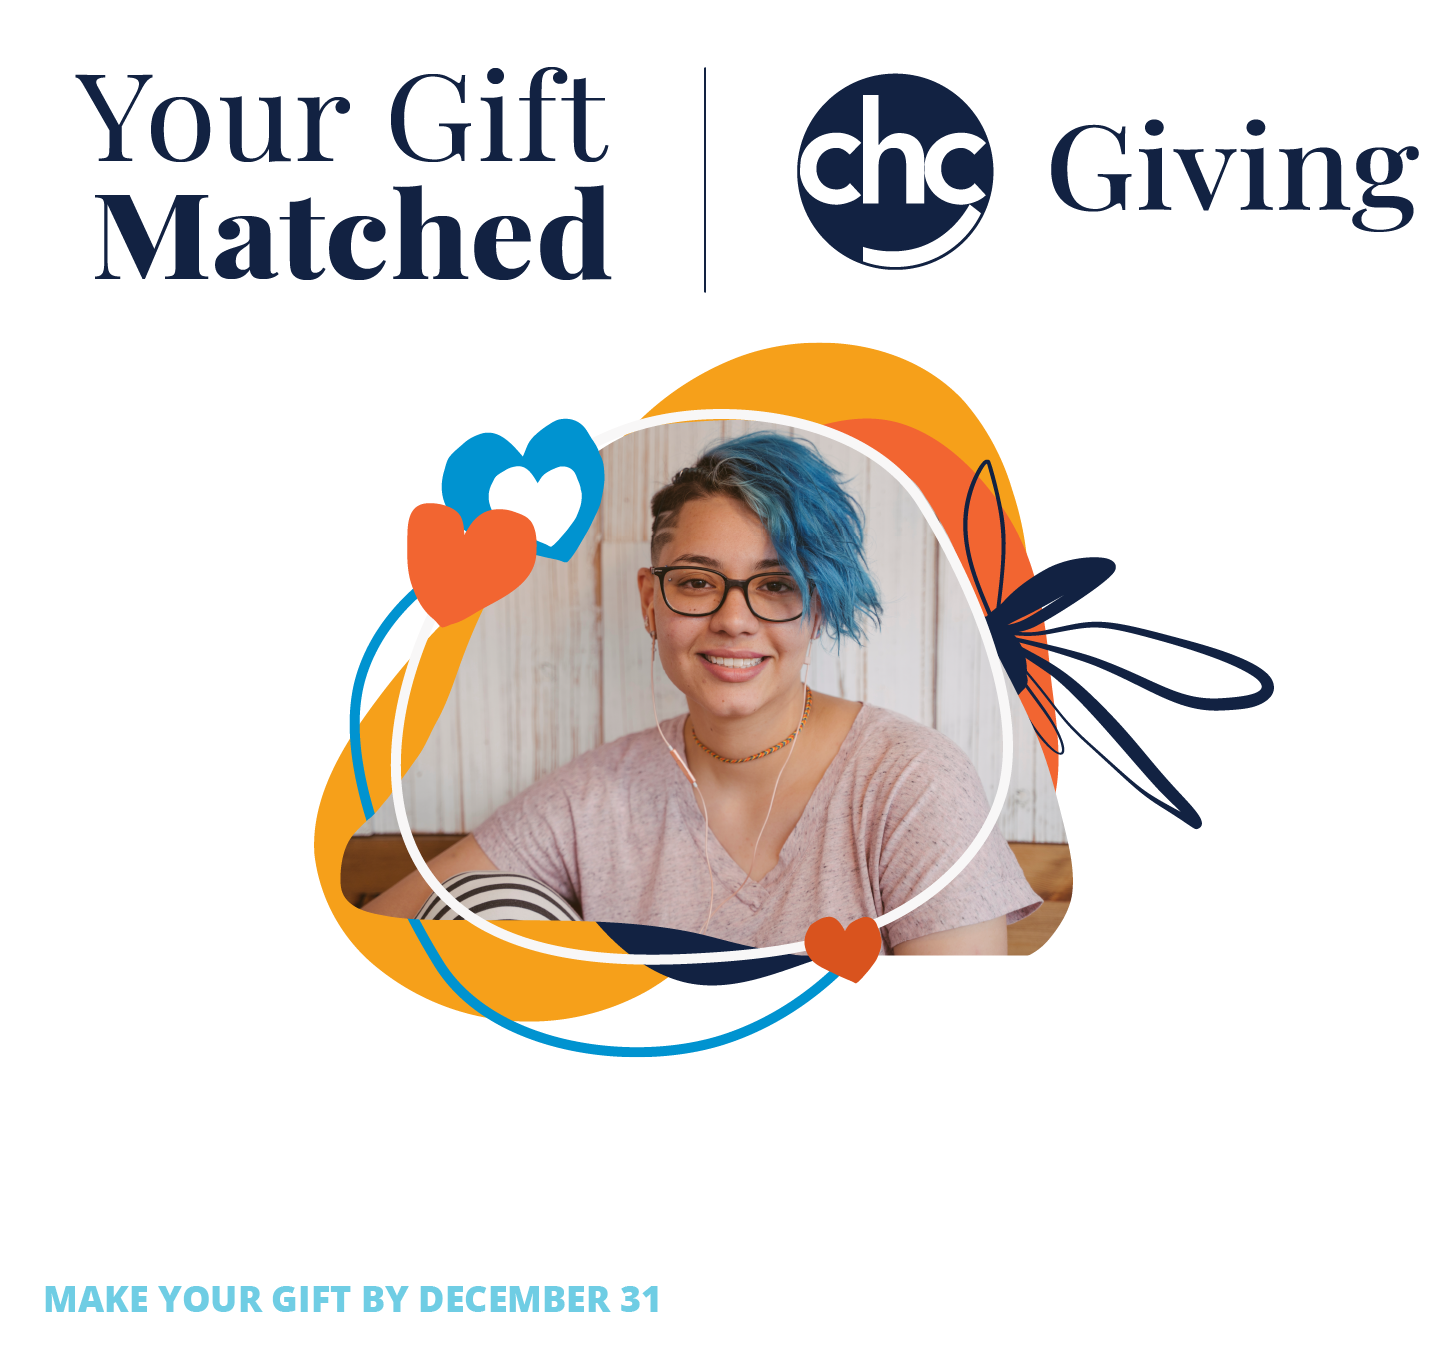 Your Gift Matched. CHC Giving. Support CHC's financial assistance program to ensure that every young person can access care. Make your gift by December 31 and your gift will be doubled or tripled.